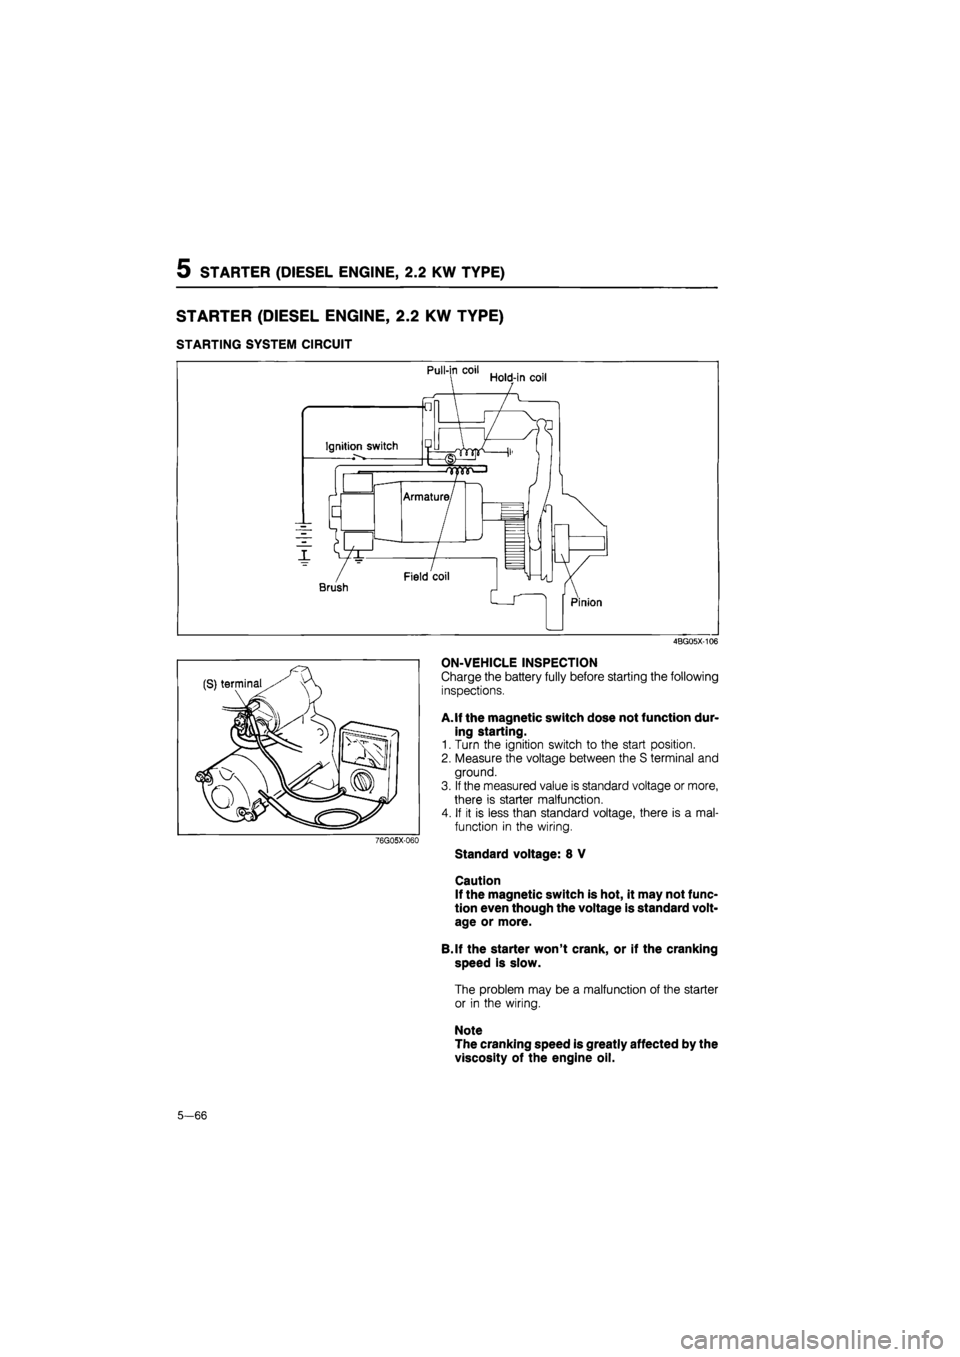 MAZDA 626 1987  Workshop Manual 
5 STARTER (DIESEL ENGINE, 2.0 KW TYPE) 
STARTER (DIESEL
 ENGINE, 2.2
 KW TYPE) 
STARTING SYSTEM CIRCUIT 
4BG05X-106 
76G05X-060 
ON-VEHICLE INSPECTION 
Charge the battery fully before starting the fo